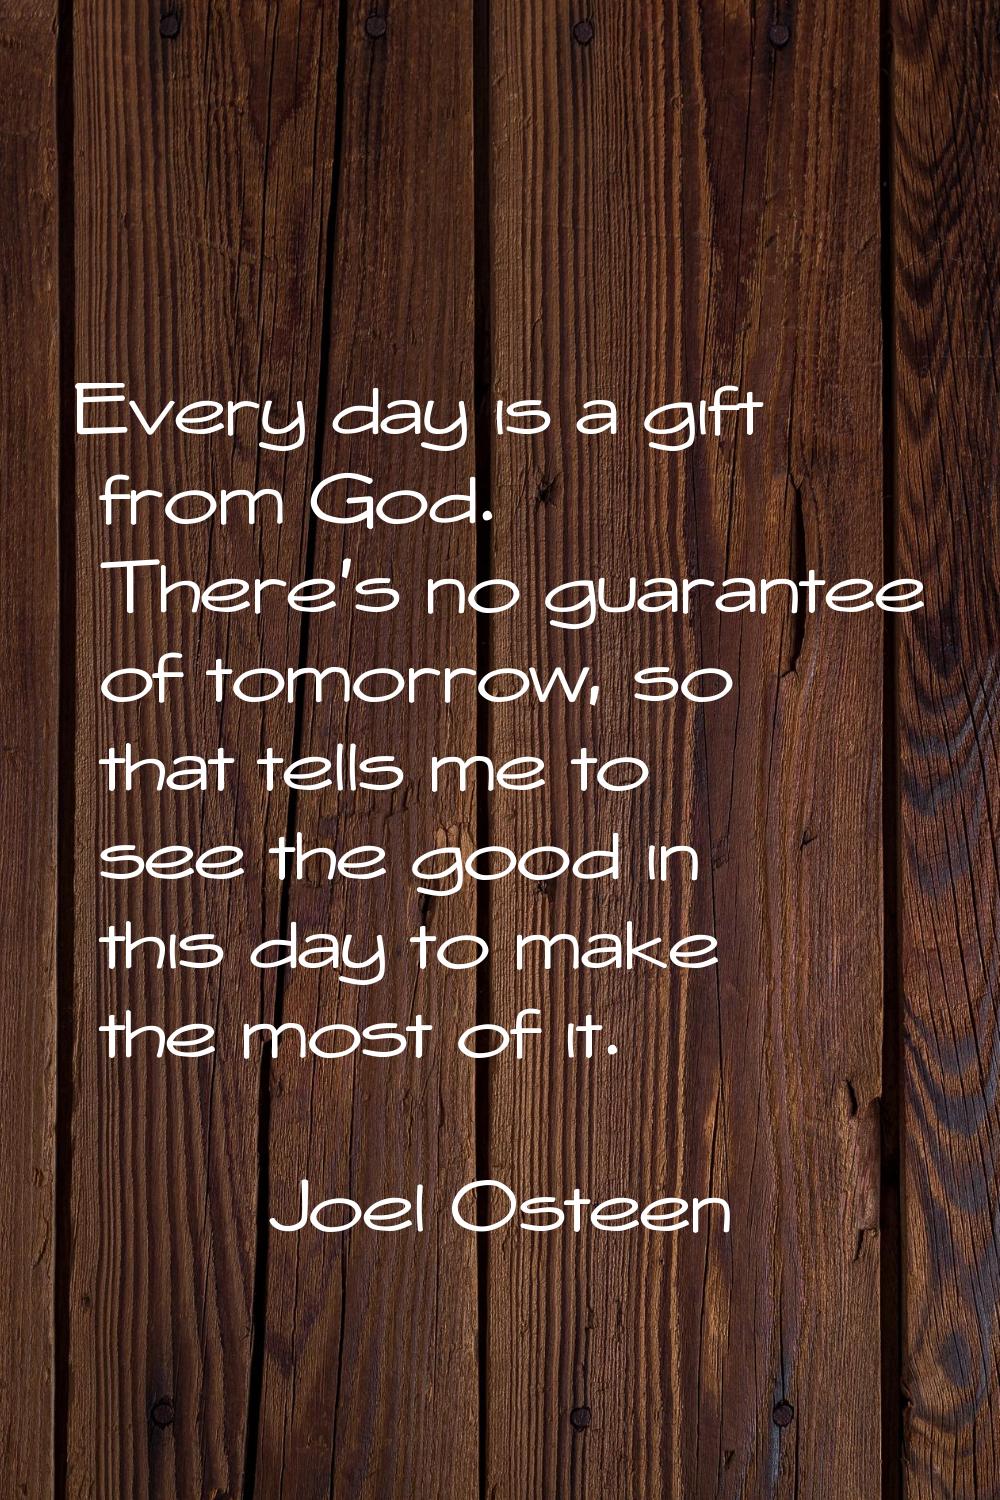 Every day is a gift from God. There's no guarantee of tomorrow, so that tells me to see the good in